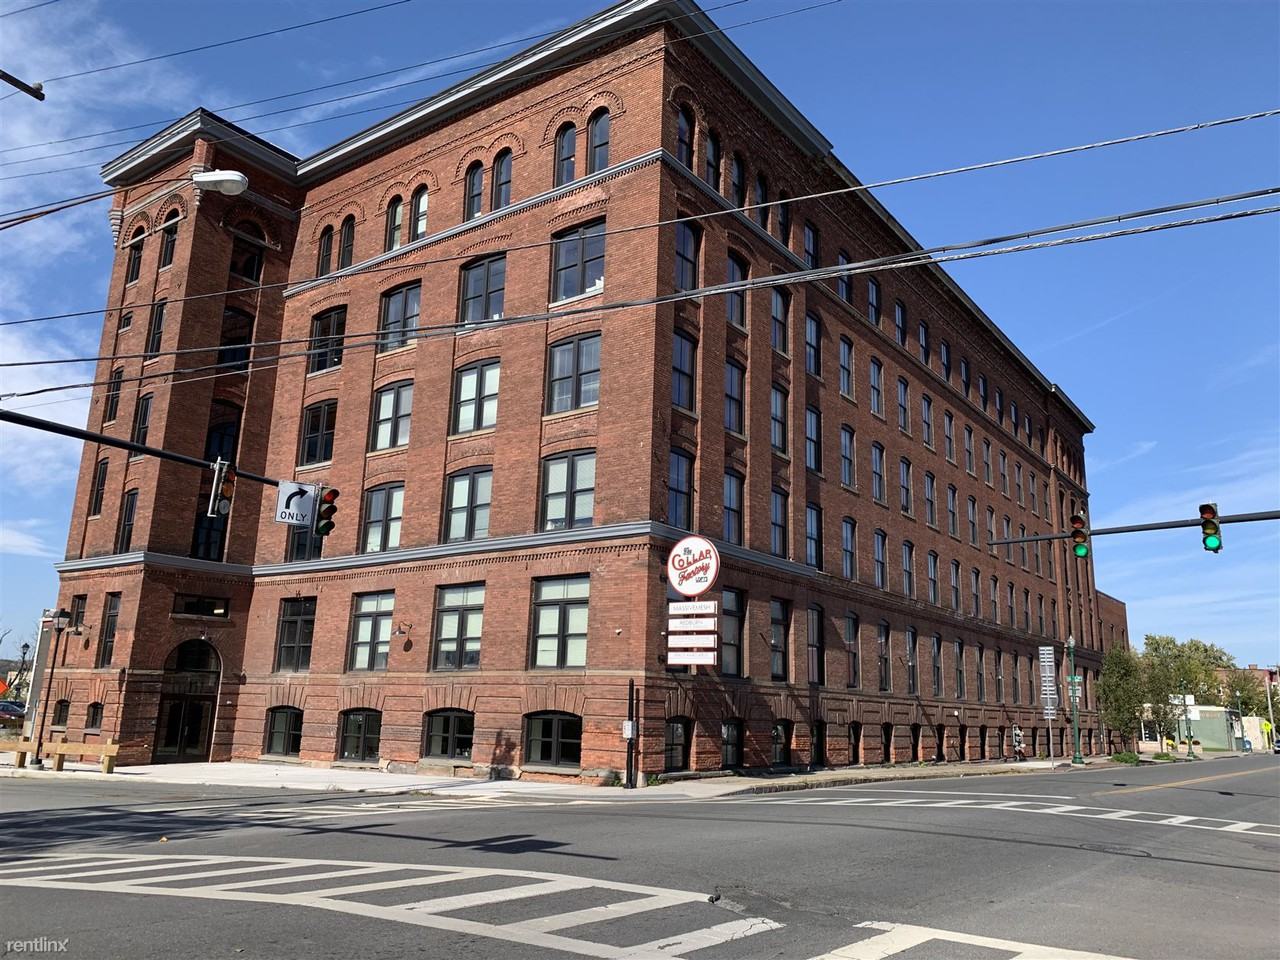 The Collar Factory Lofts Apartments - 701 River St, Troy, NY 12180 - Zumper